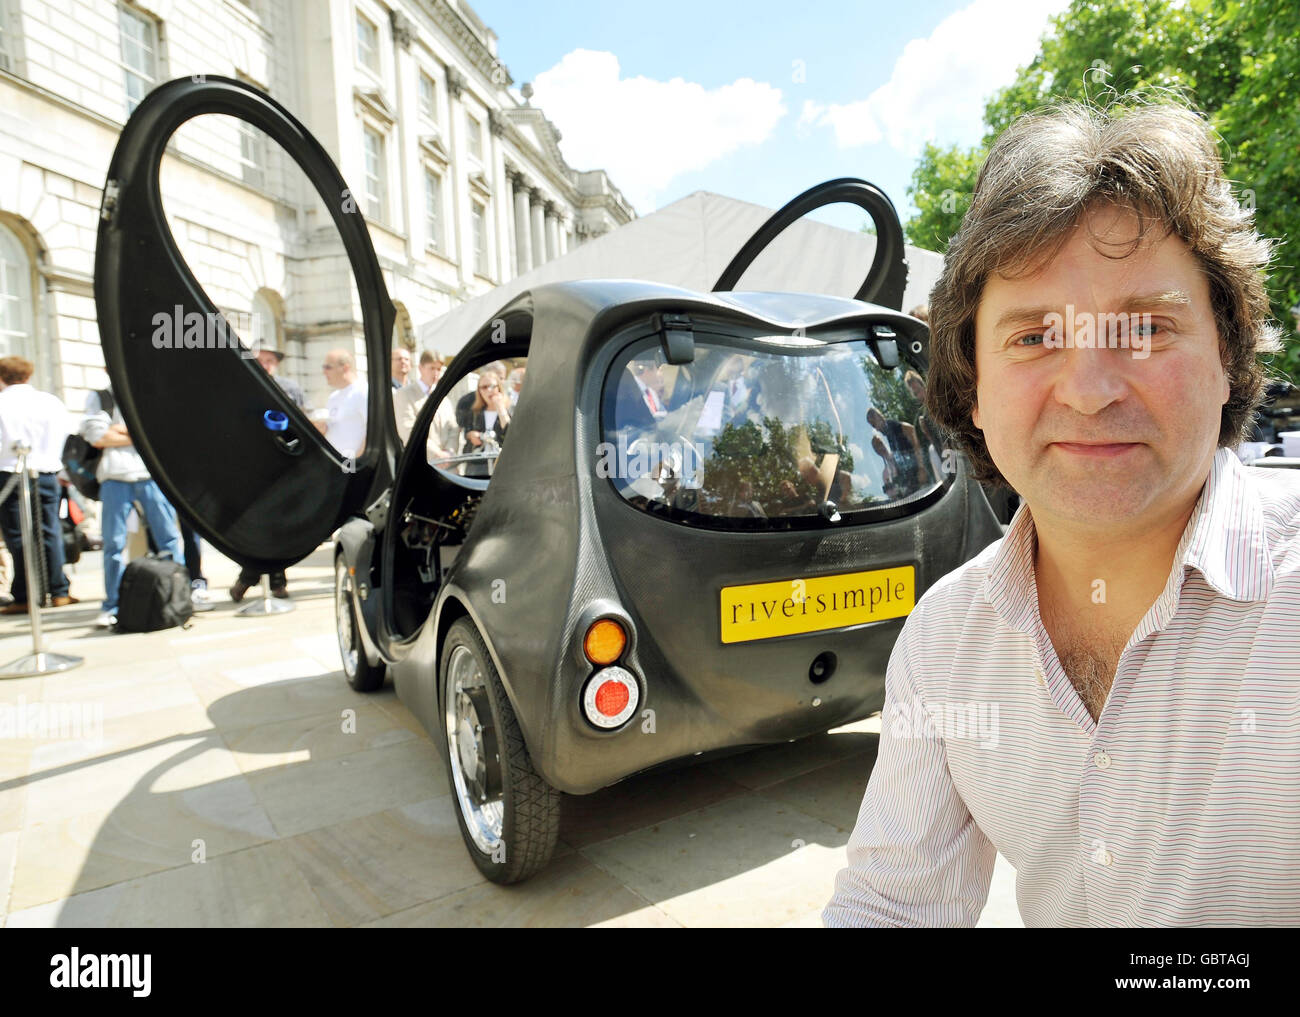 Hugo Spowers, the founder and brains behind the Riversimple hydrogen-powered car during its debut in central London. Stock Photo